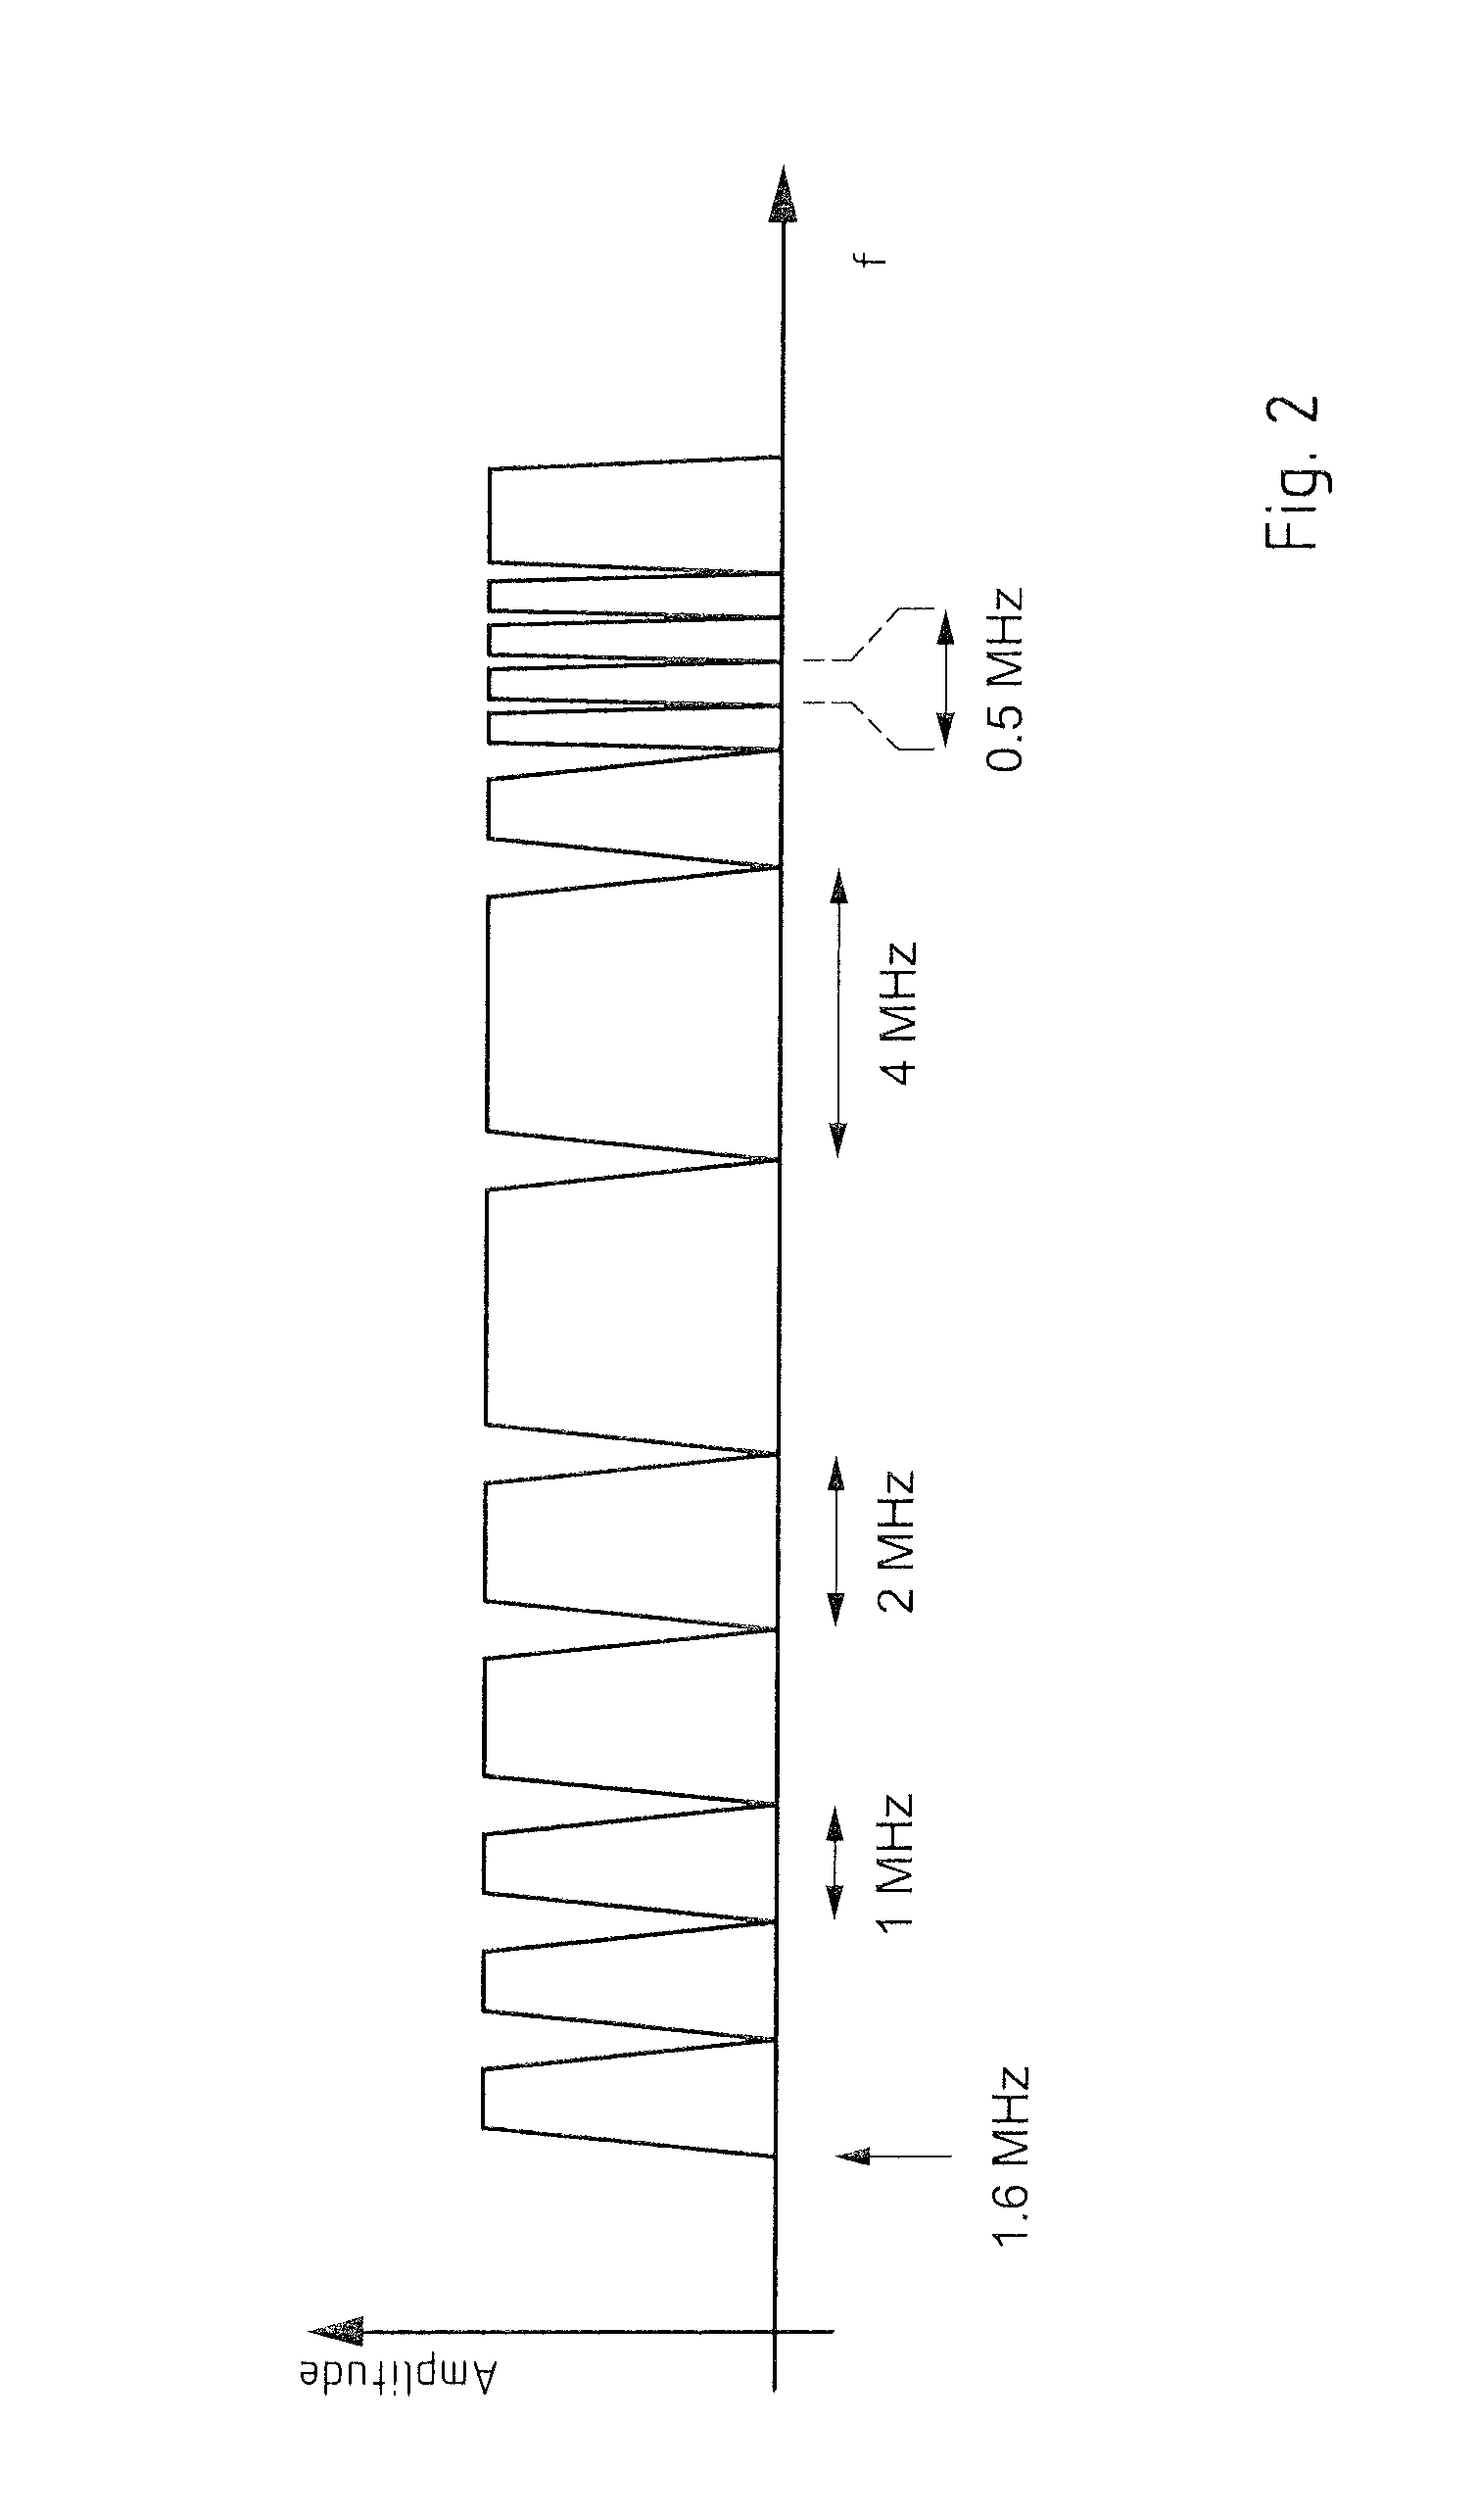 System and method for data communication over power lines